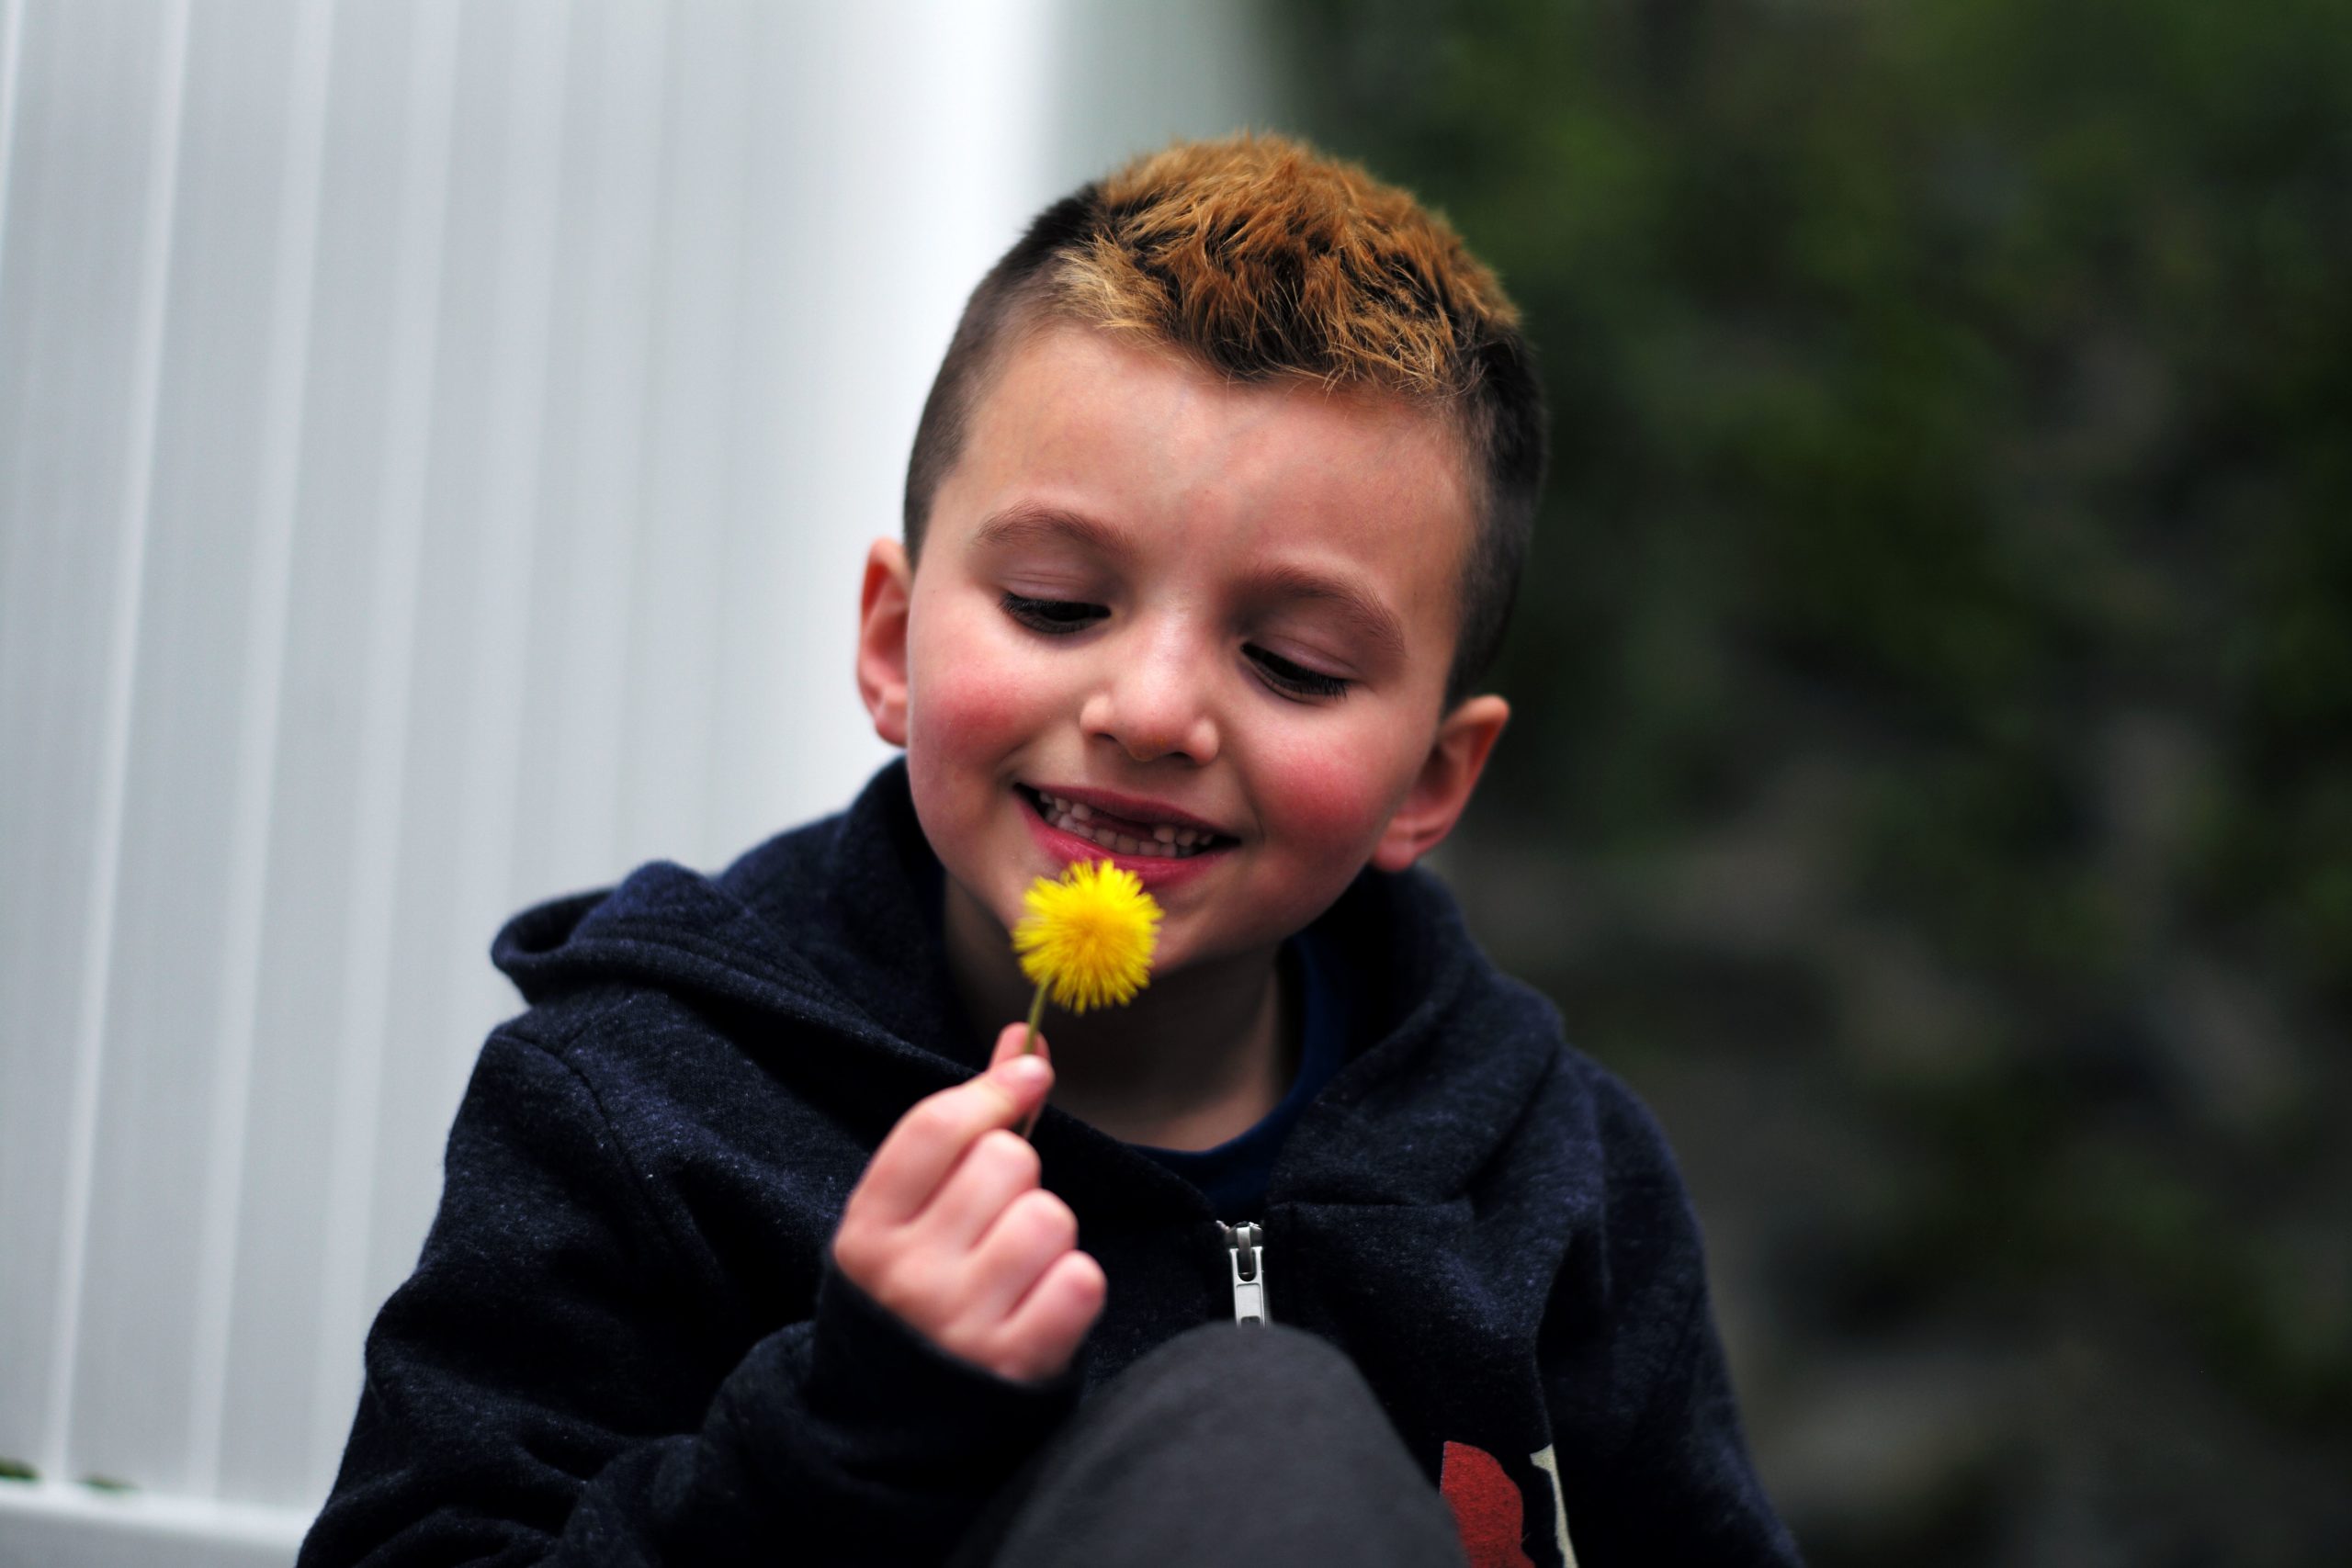 Seven-year-old transgender boy Jacob Lemay poses for photos in the yard of his home in Melrose, Massachusetts, on May 9, 2017. For months in the Lemay home, the same phrase was repeated over and over by their troubled young child, barely more than a toddler, who showed growing signs of depression. "It is a mistake, I am not a girl, I am a boy." That convinced the Lemay family that Mia should become Jacob.  (Photo credit JEWEL SAMAD/AFP via Getty Images)